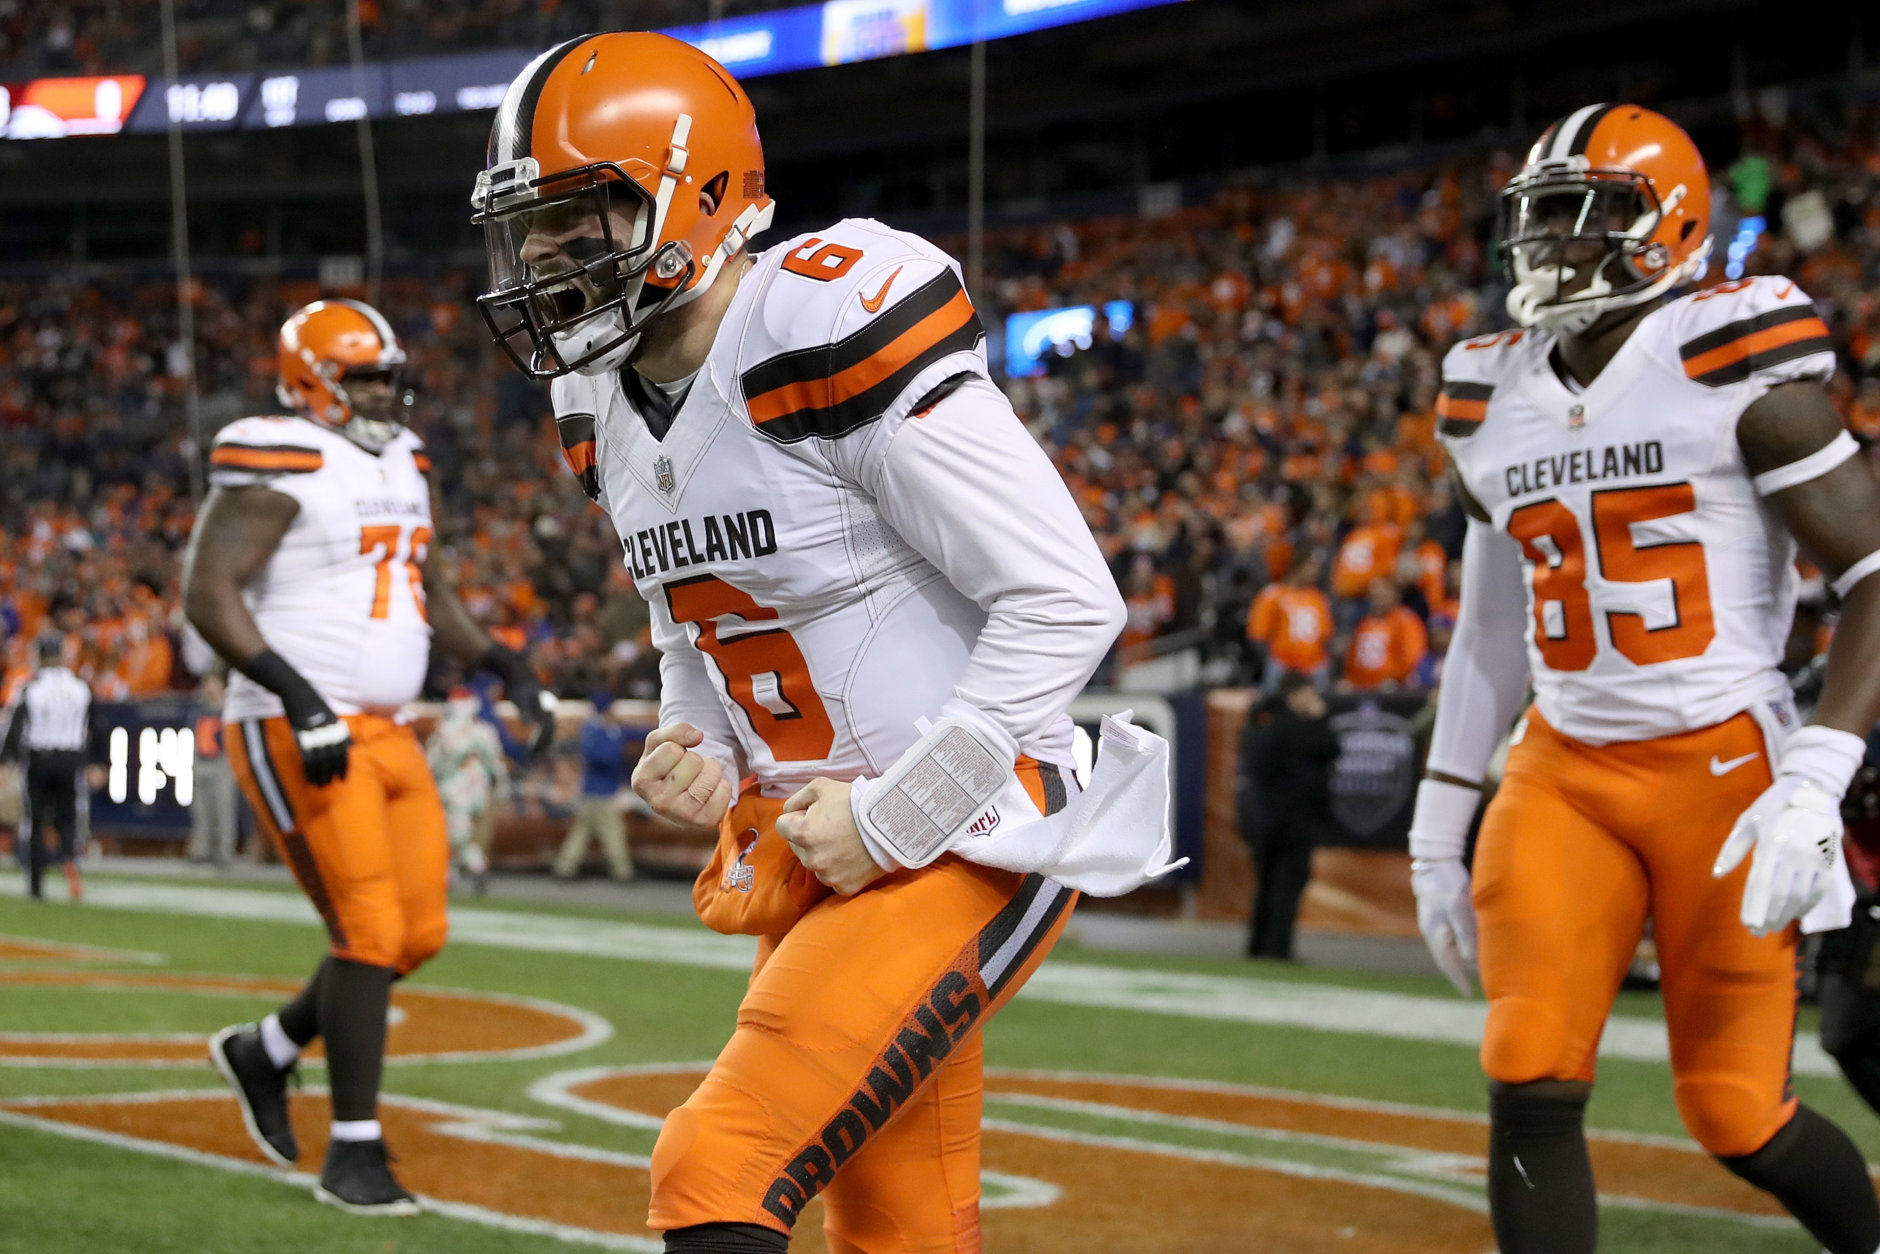 DENVER, COLORADO - DECEMBER 15: Quarterback Baker Mayfield #6 of the Cleveland Browns celebrates a touchdown against the Denver Broncos at Broncos Stadium at Mile High on December 15, 2018 in Denver, Colorado. (Photo by Matthew Stockman/Getty Images)